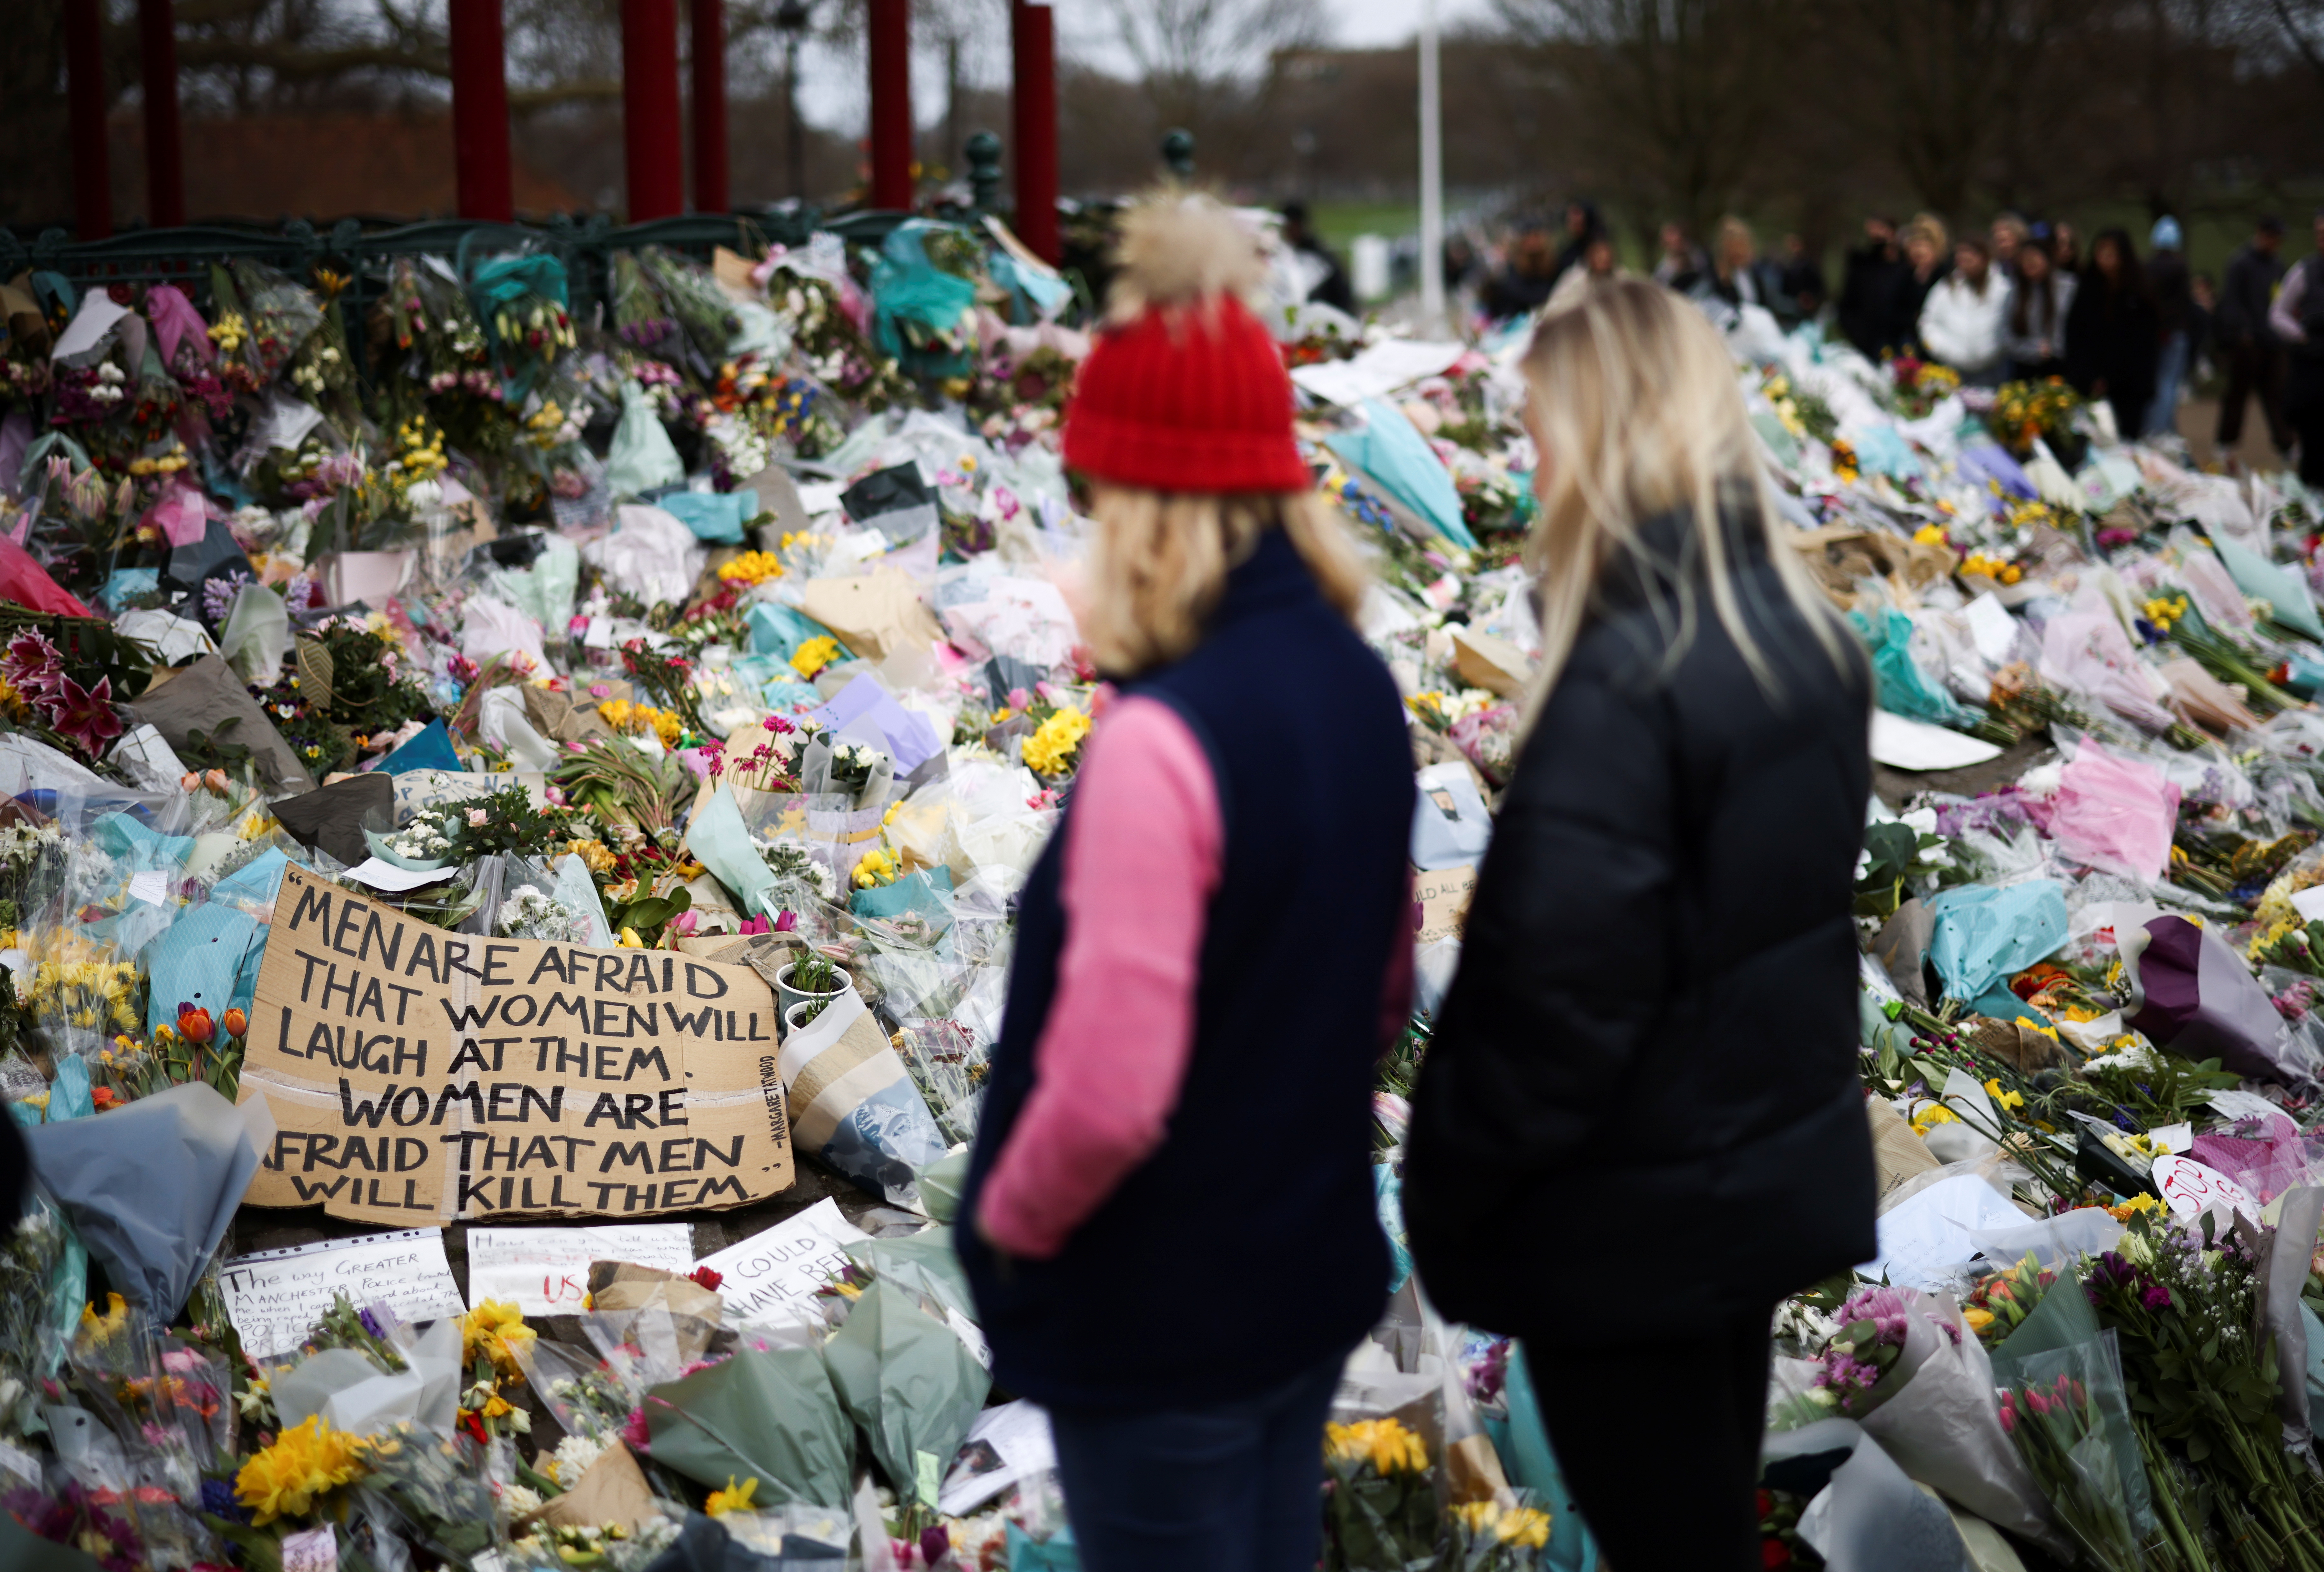 People observe a memorial site at the Clapham Common Bandstand, following the kidnapping and murder of Sarah Everard, in London